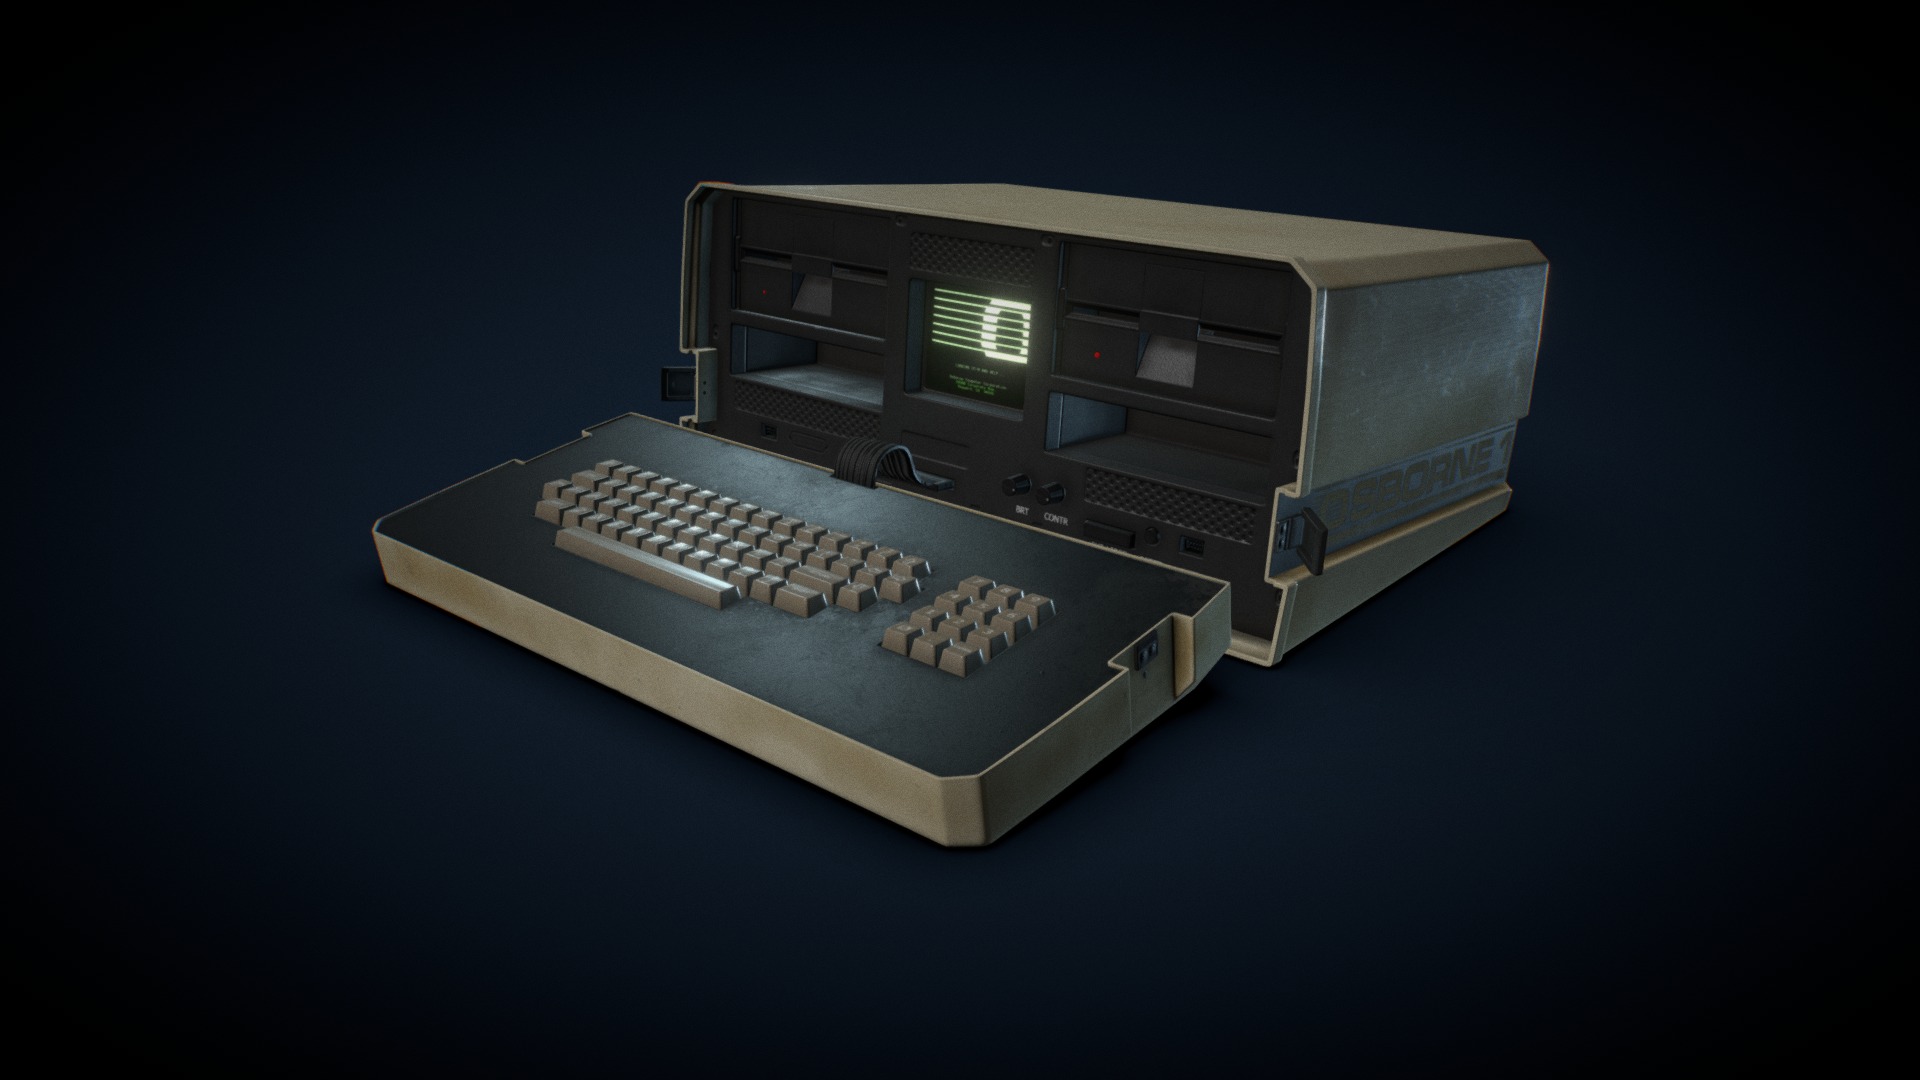 3D model Osborne 1 - This is a 3D model of the Osborne 1. The 3D model is about a computer with a keyboard.